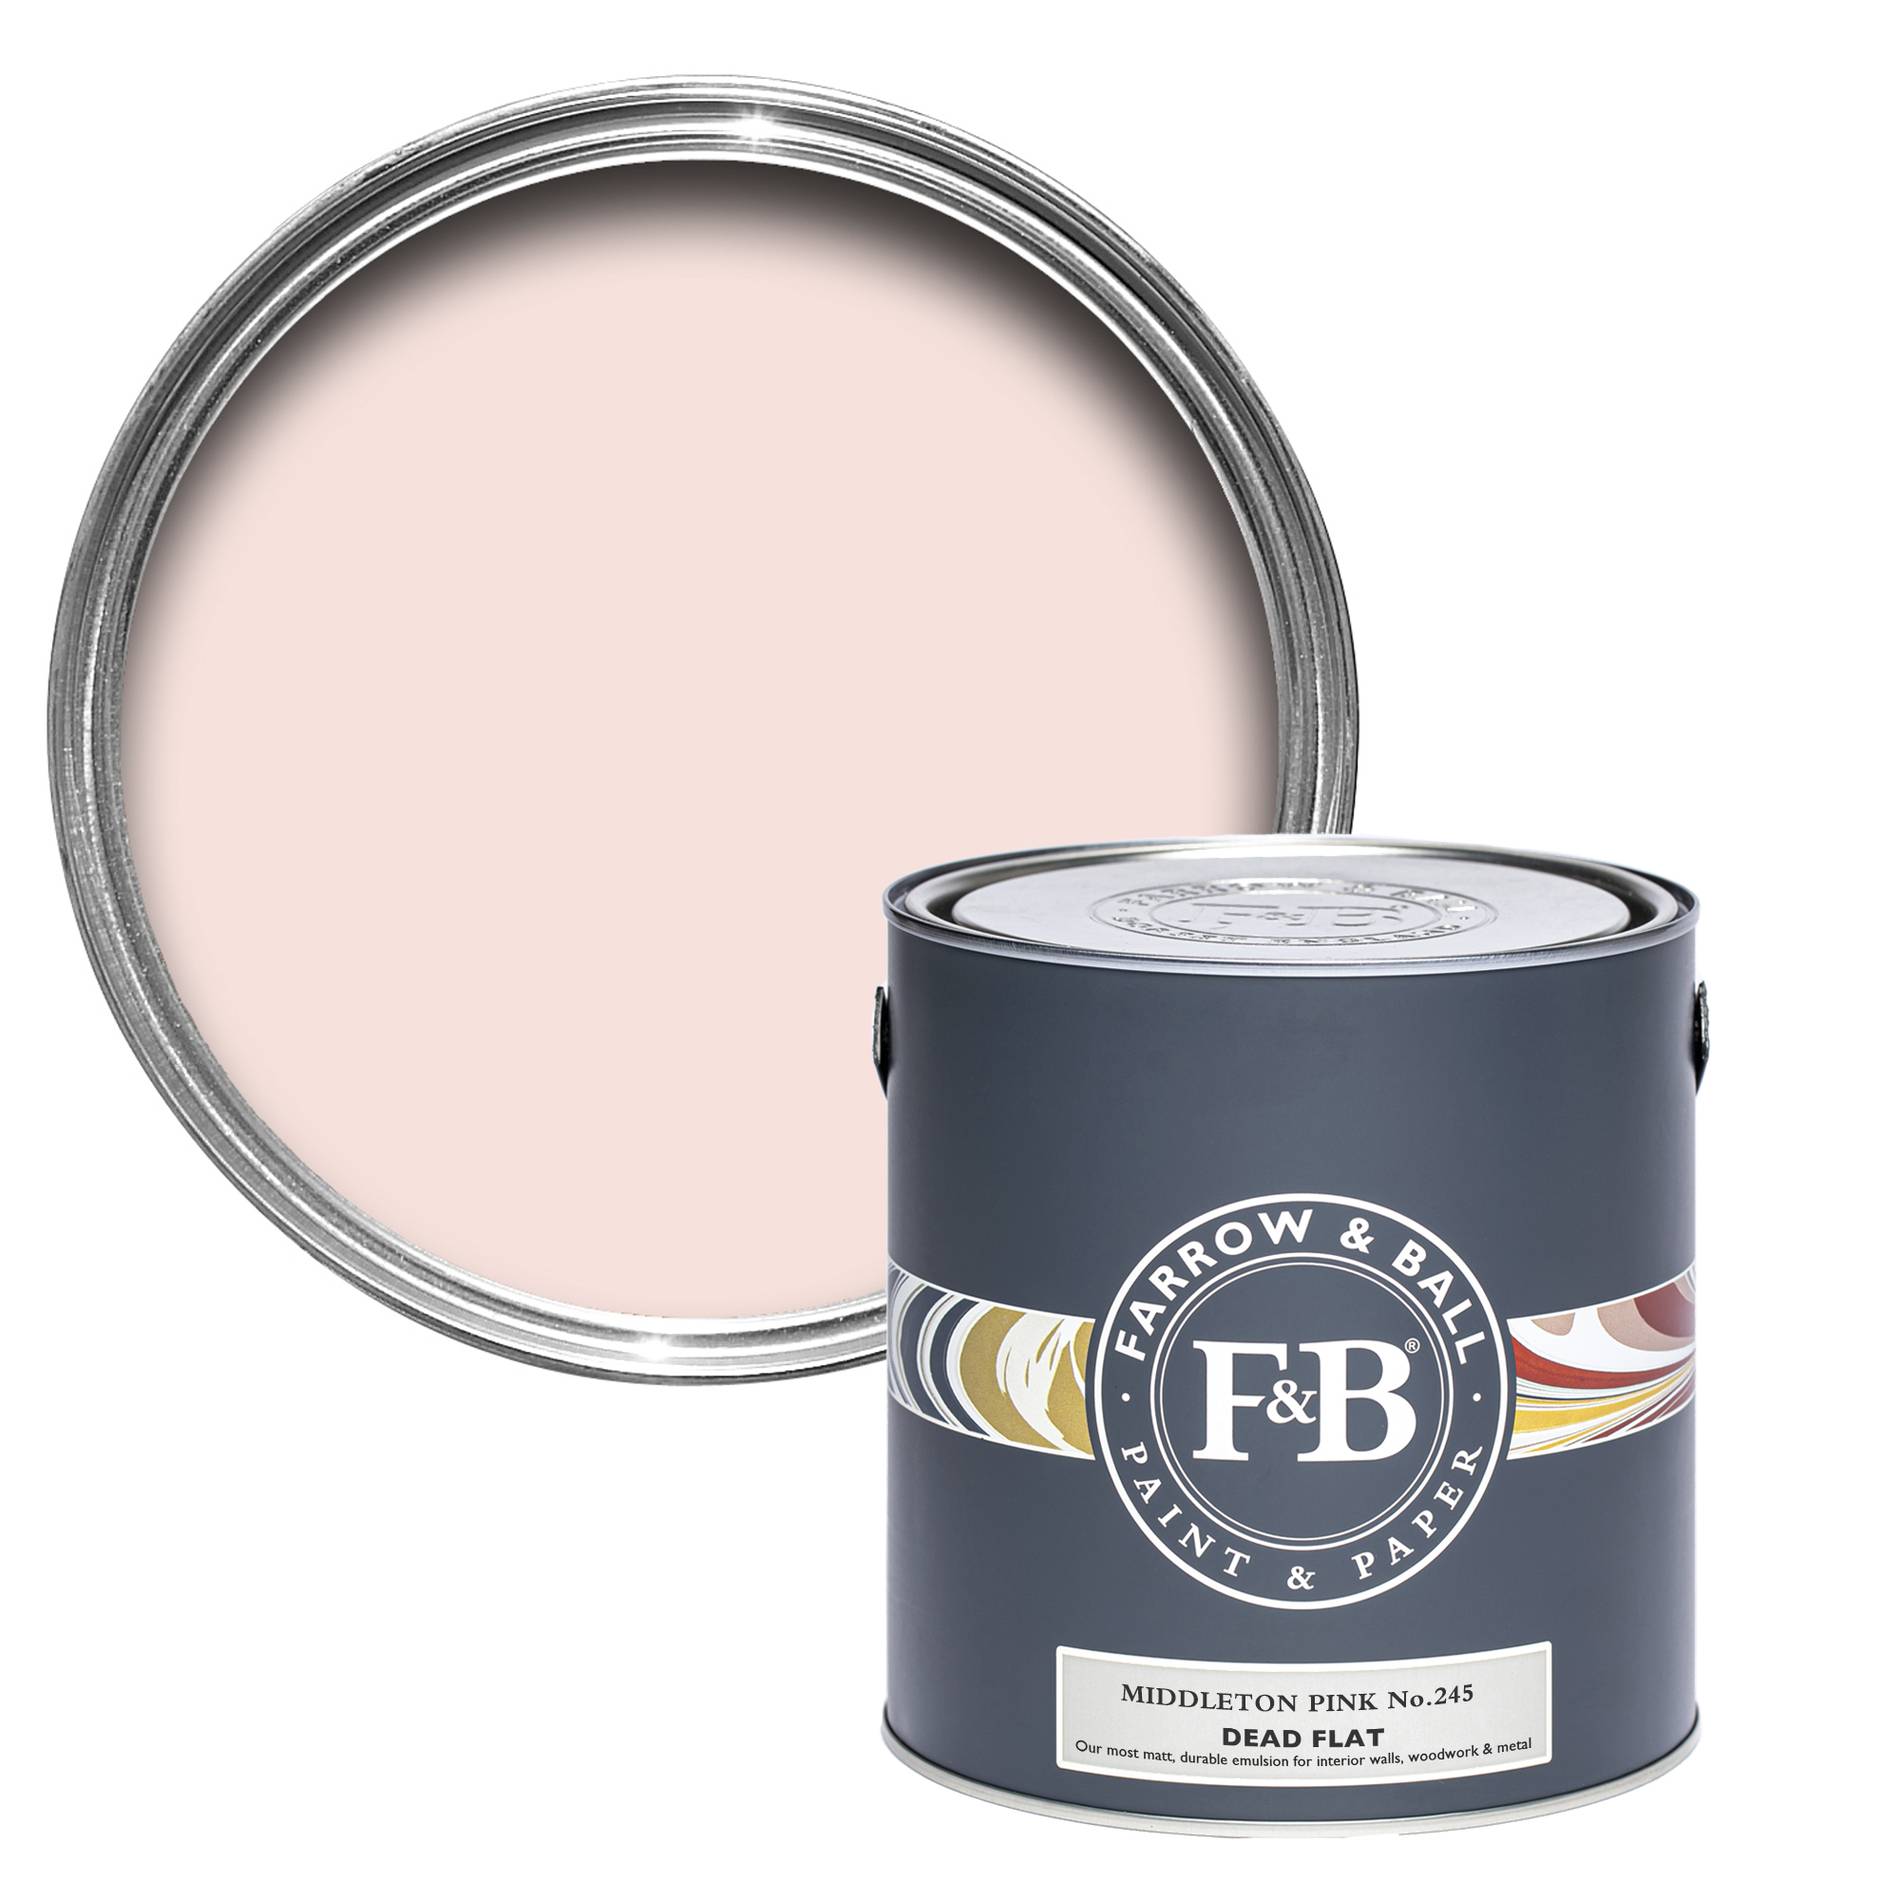 The 9 Best Pink Paint Colors For Your Home